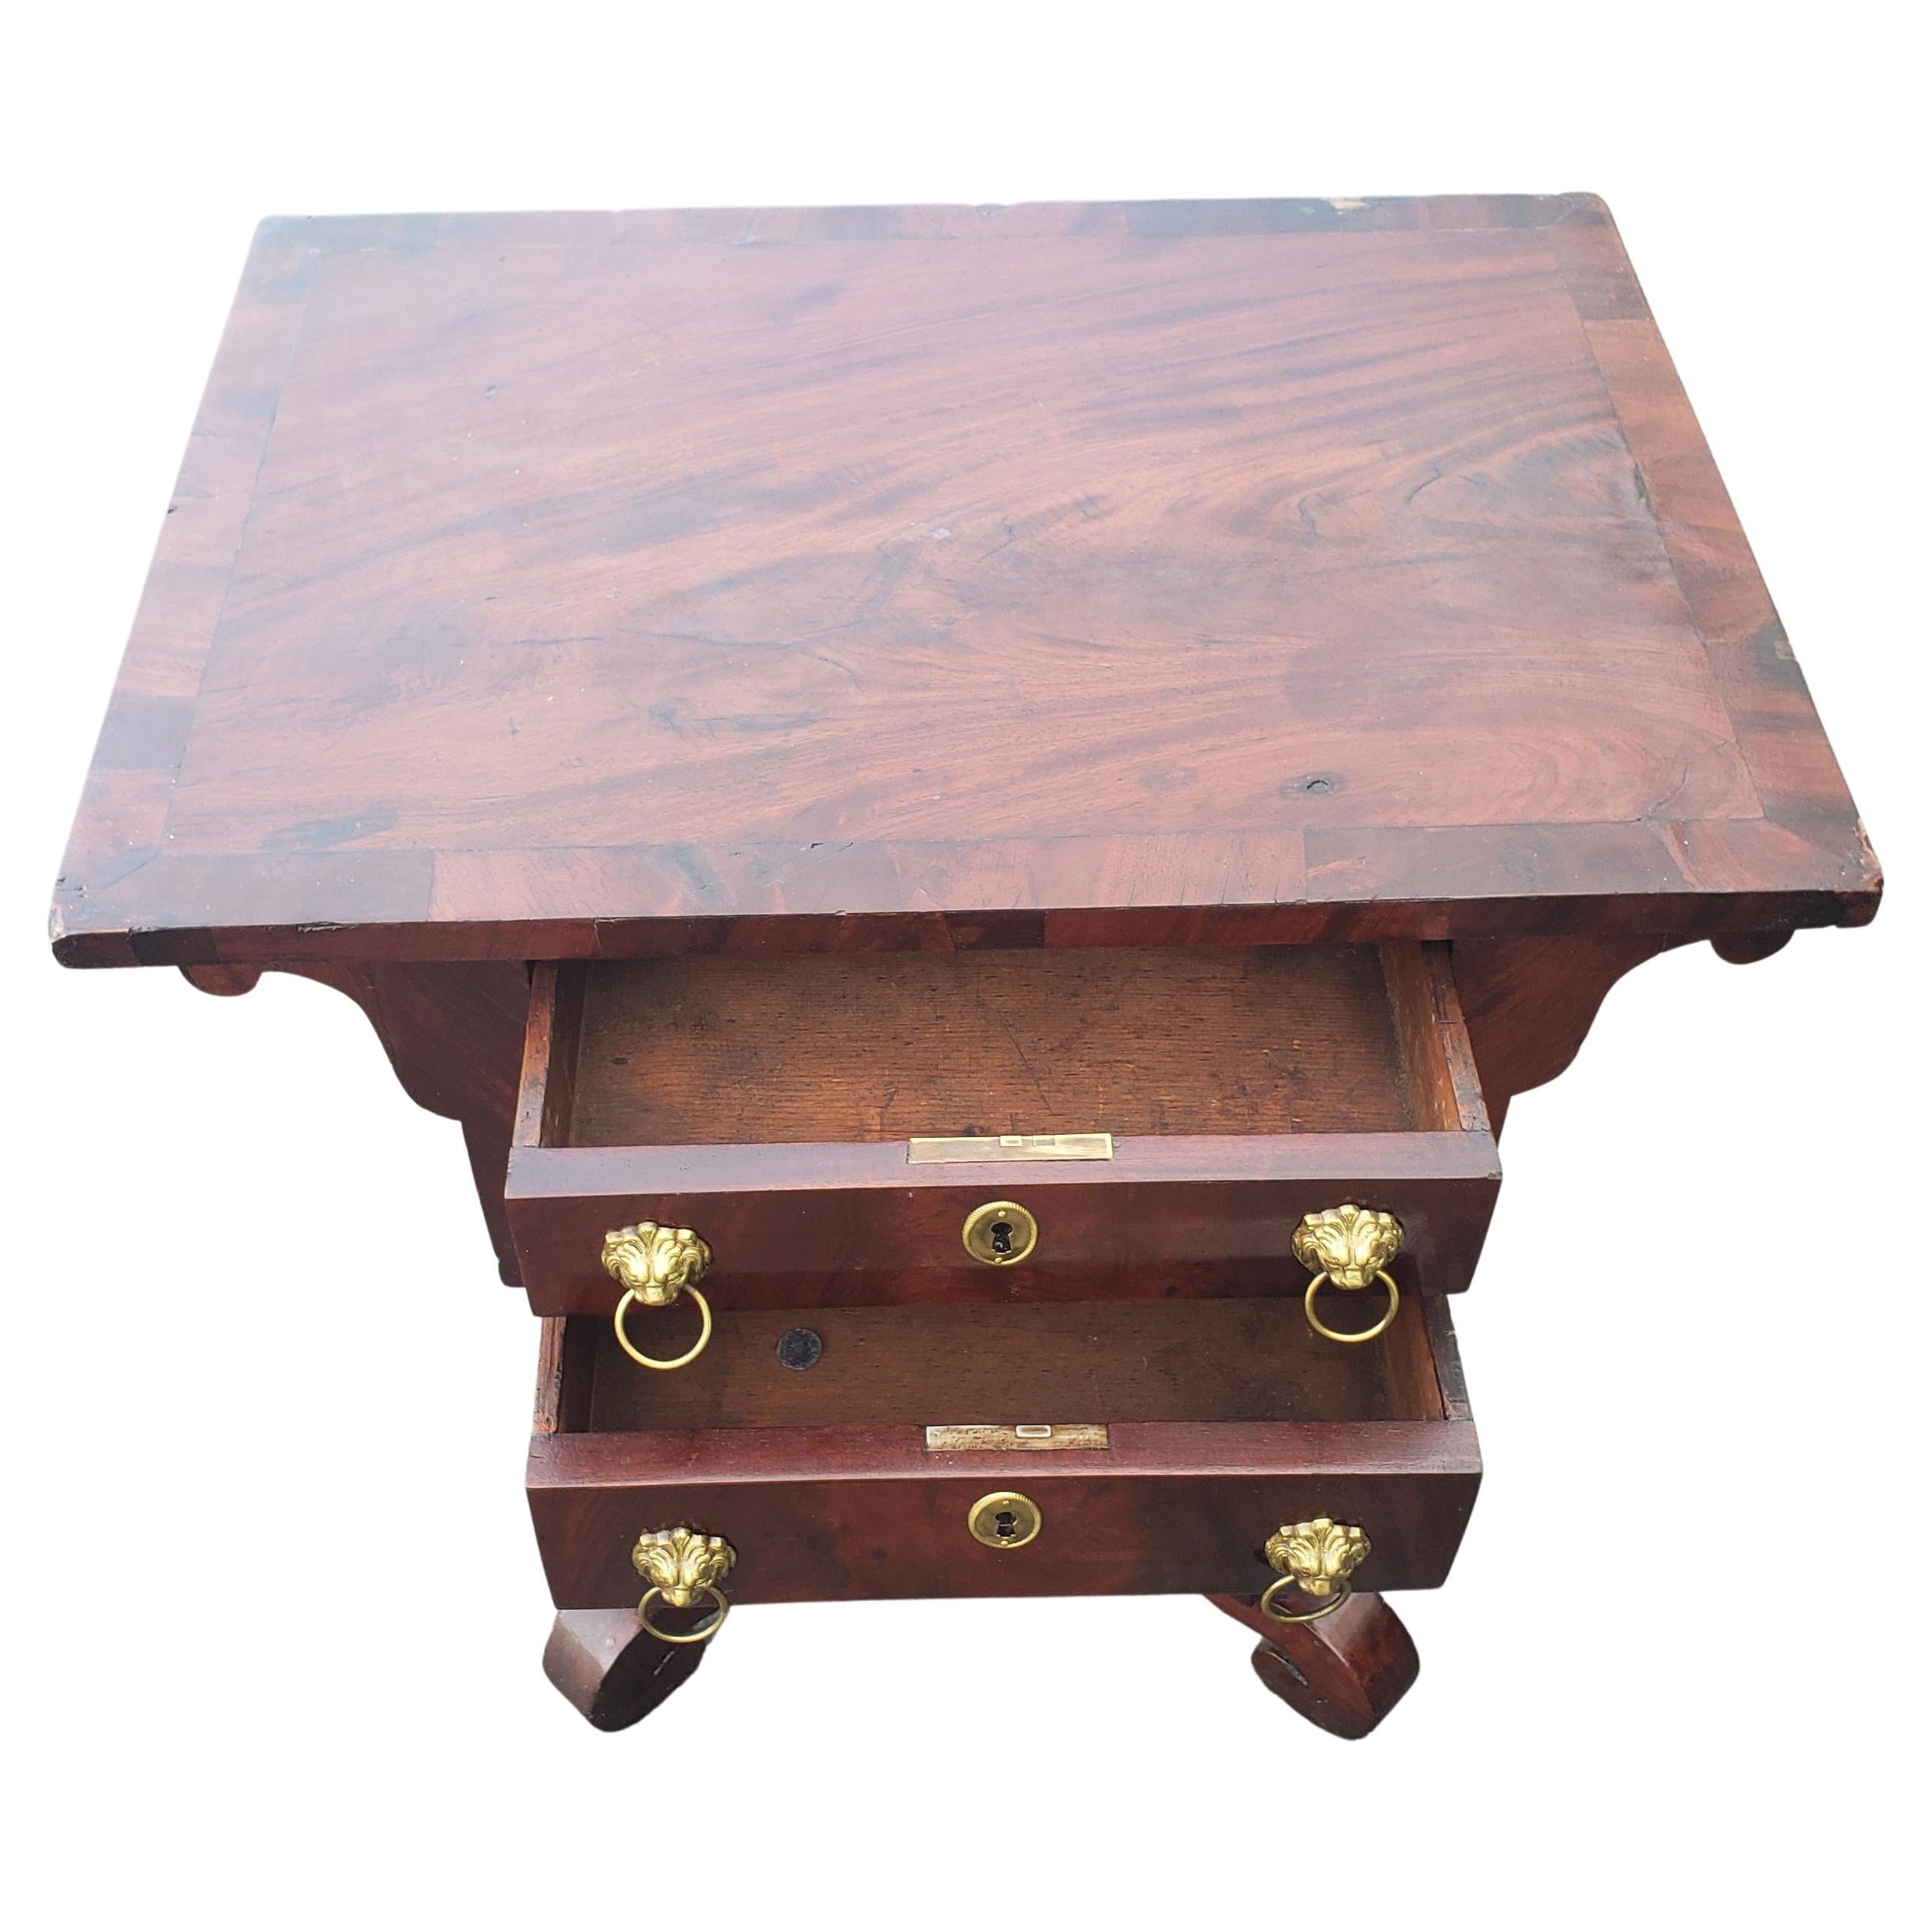 Veneer American Empire Two-Drawer Flame Mahogany Side Table End Table, Circa 1800s